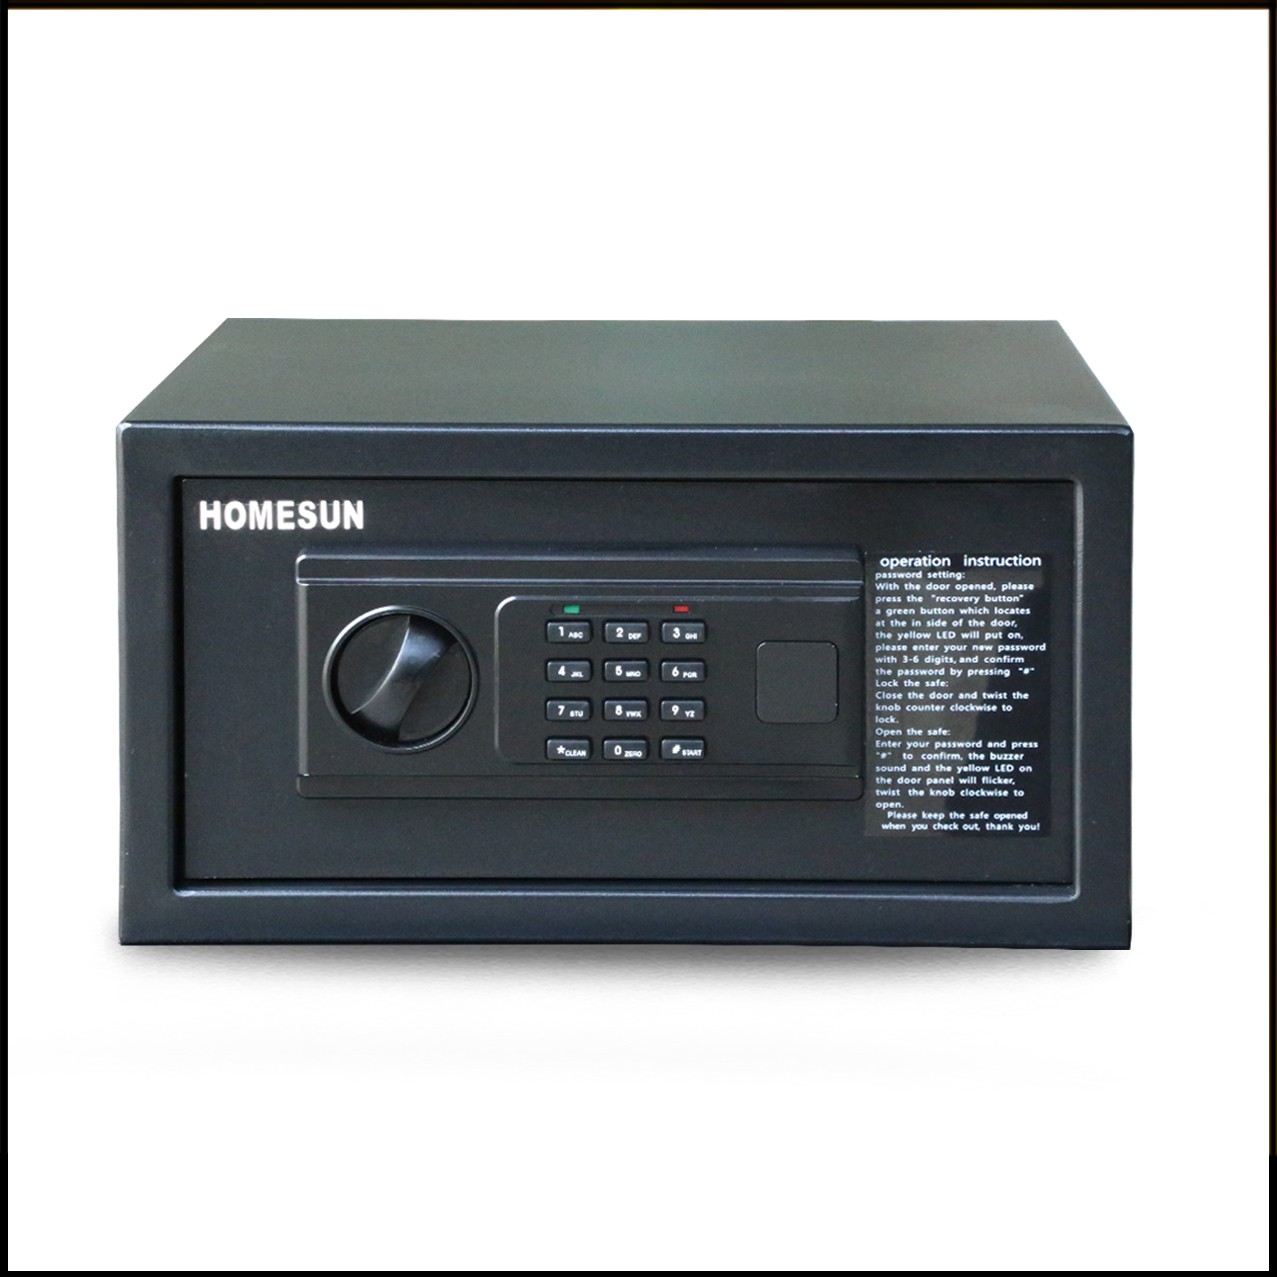 Best Sellers In Hotel Safes Wholesale Suppliers